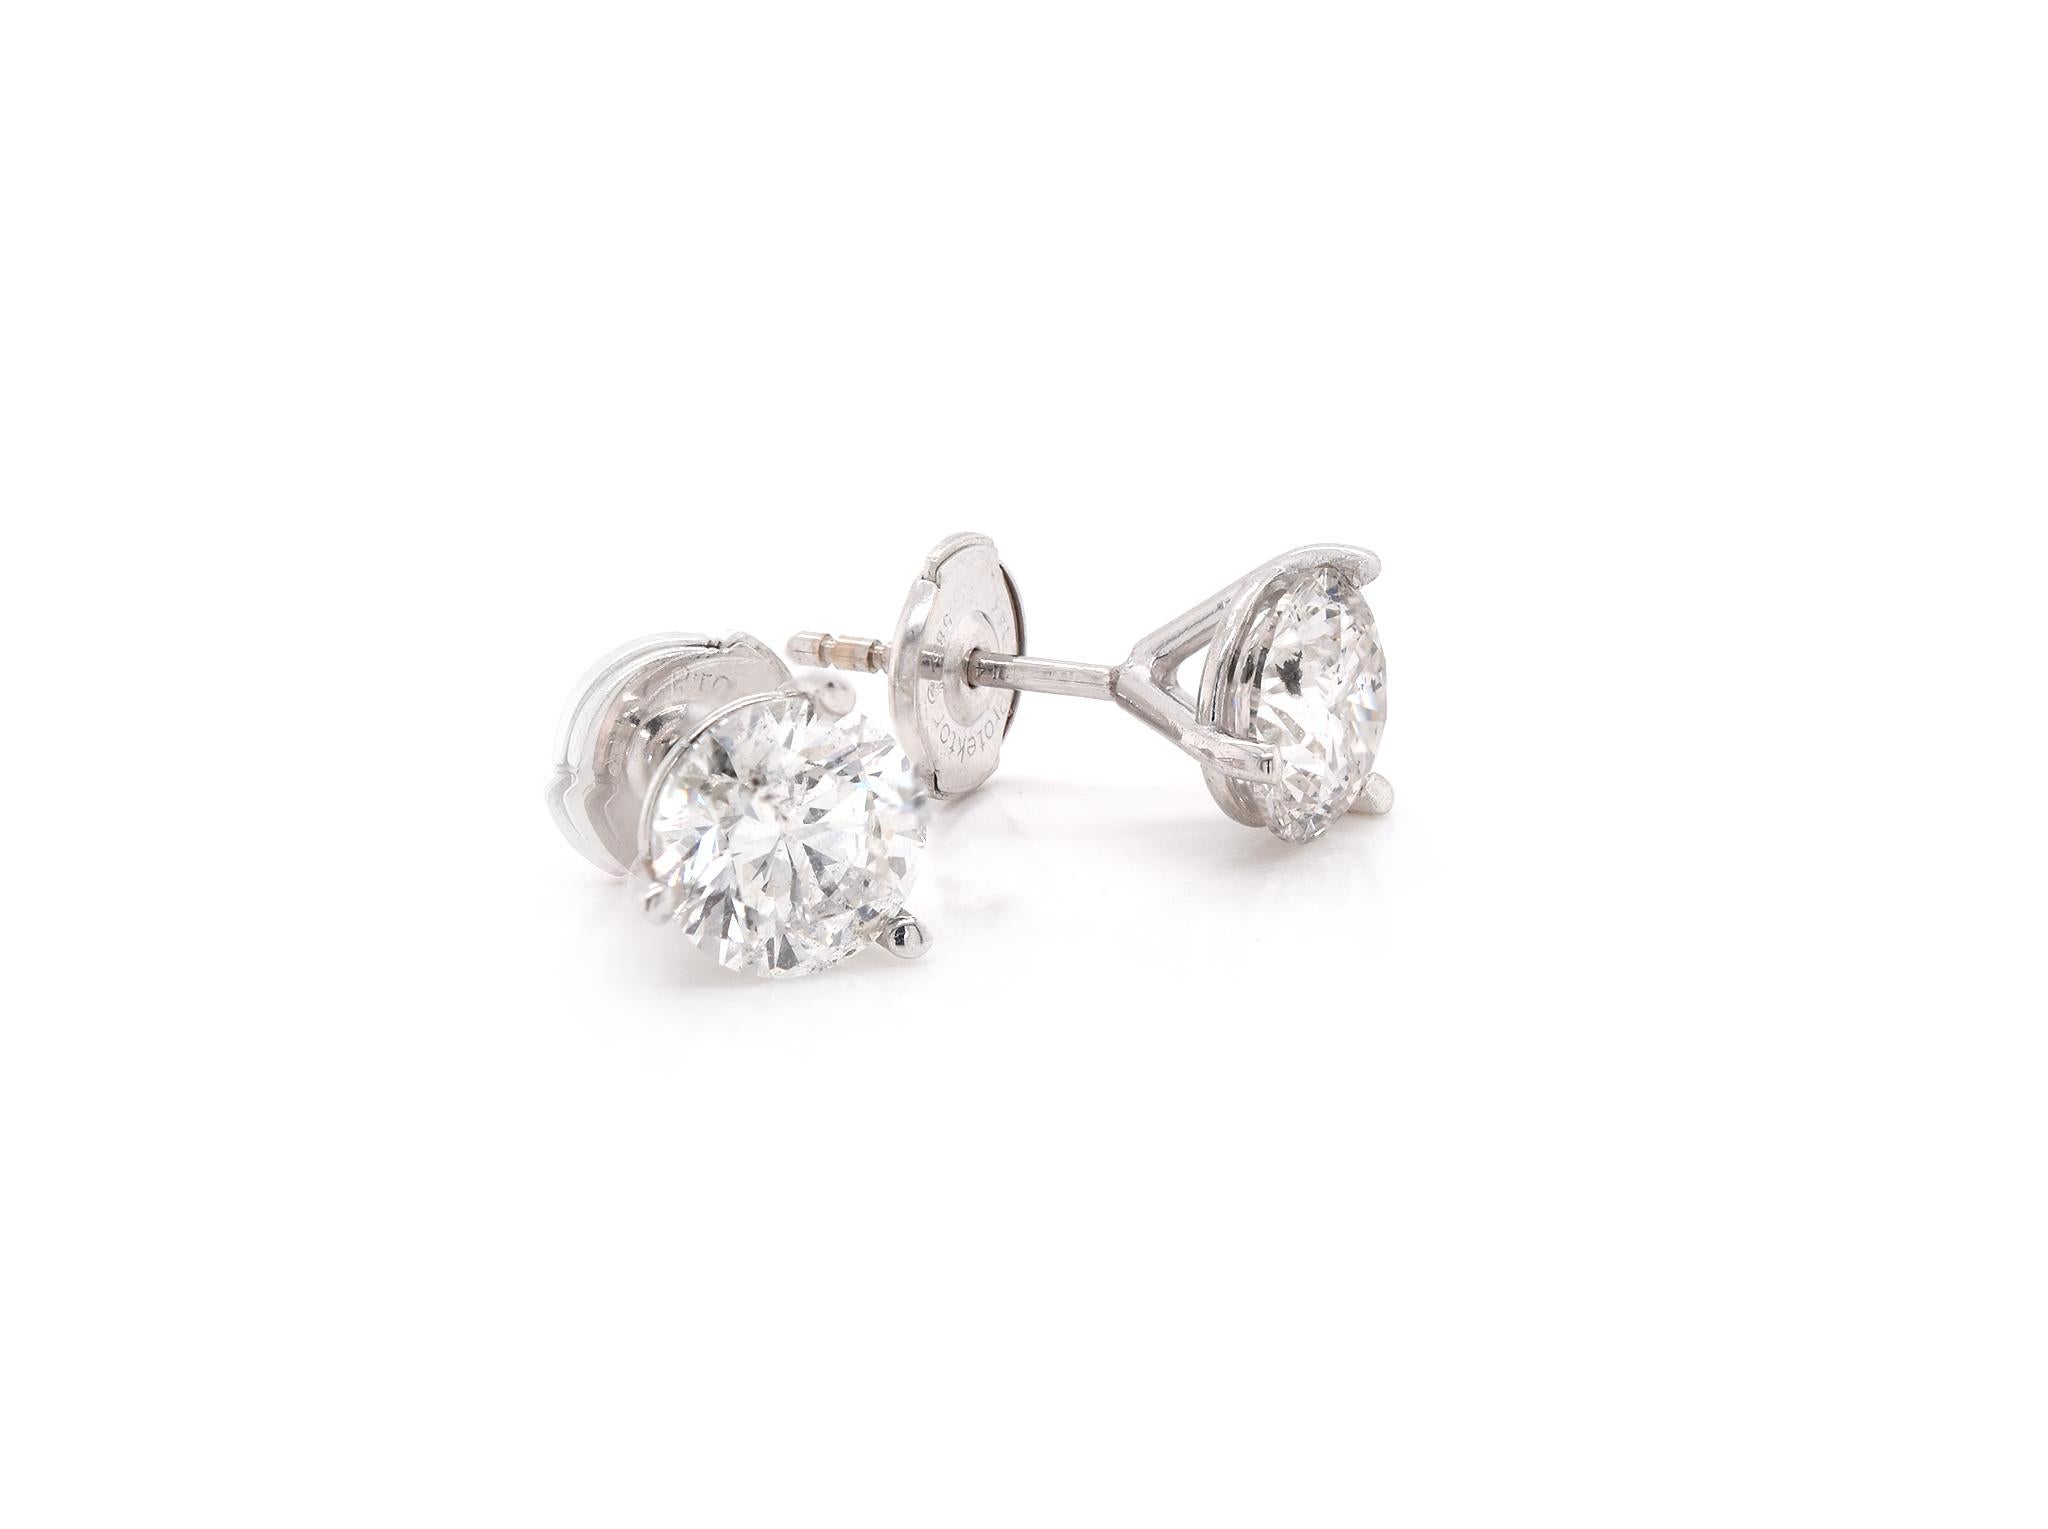 Designer: custom 
Material: 14k white gold
Diamonds: 2 round brilliant cuts= 2.49 cttw 
Color: H-I
Clarity: SI3-I1
Dimensions: earrings measure 7.65mm in width and 15.88mm in length
Fastenings: friction back with posts
Weight: 1.8 grams
